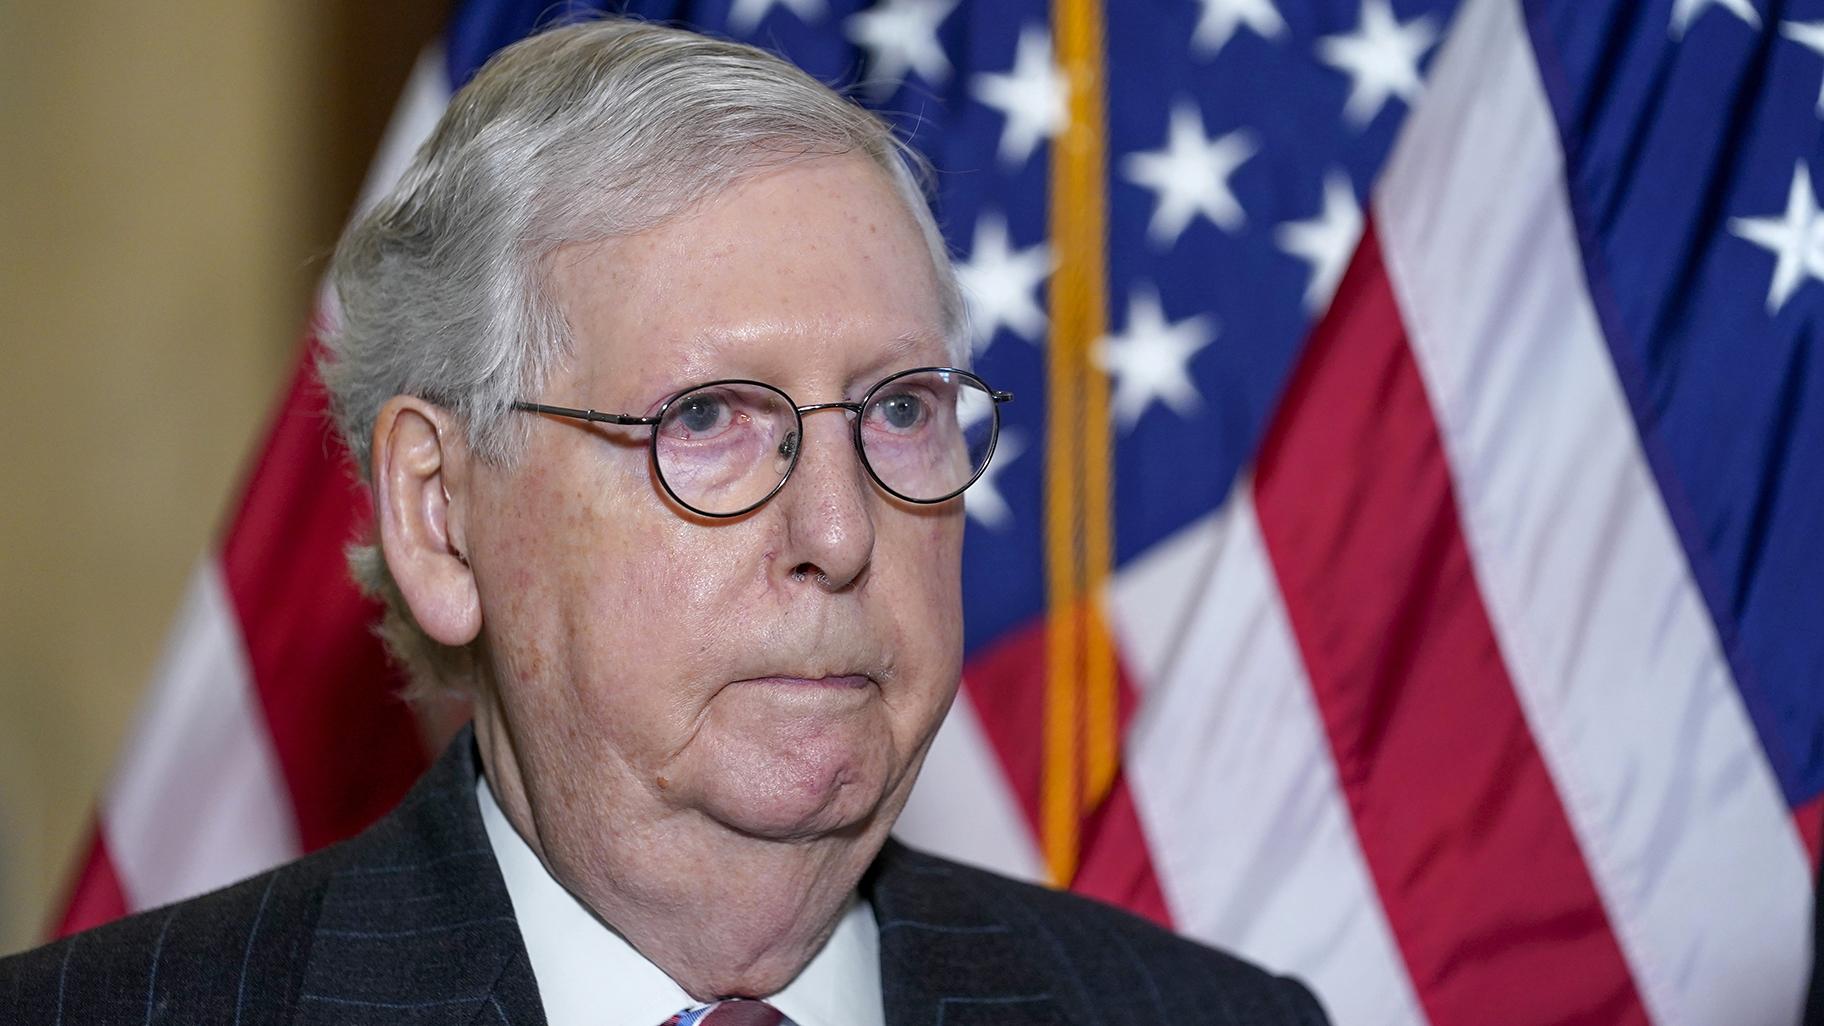 Senate Minority Leader Mitch McConnell of Ky., arrives to speak to reporters on Capitol Hill in Washington, Tuesday, Feb. 8, 2022. (AP Photo / Susan Walsh)